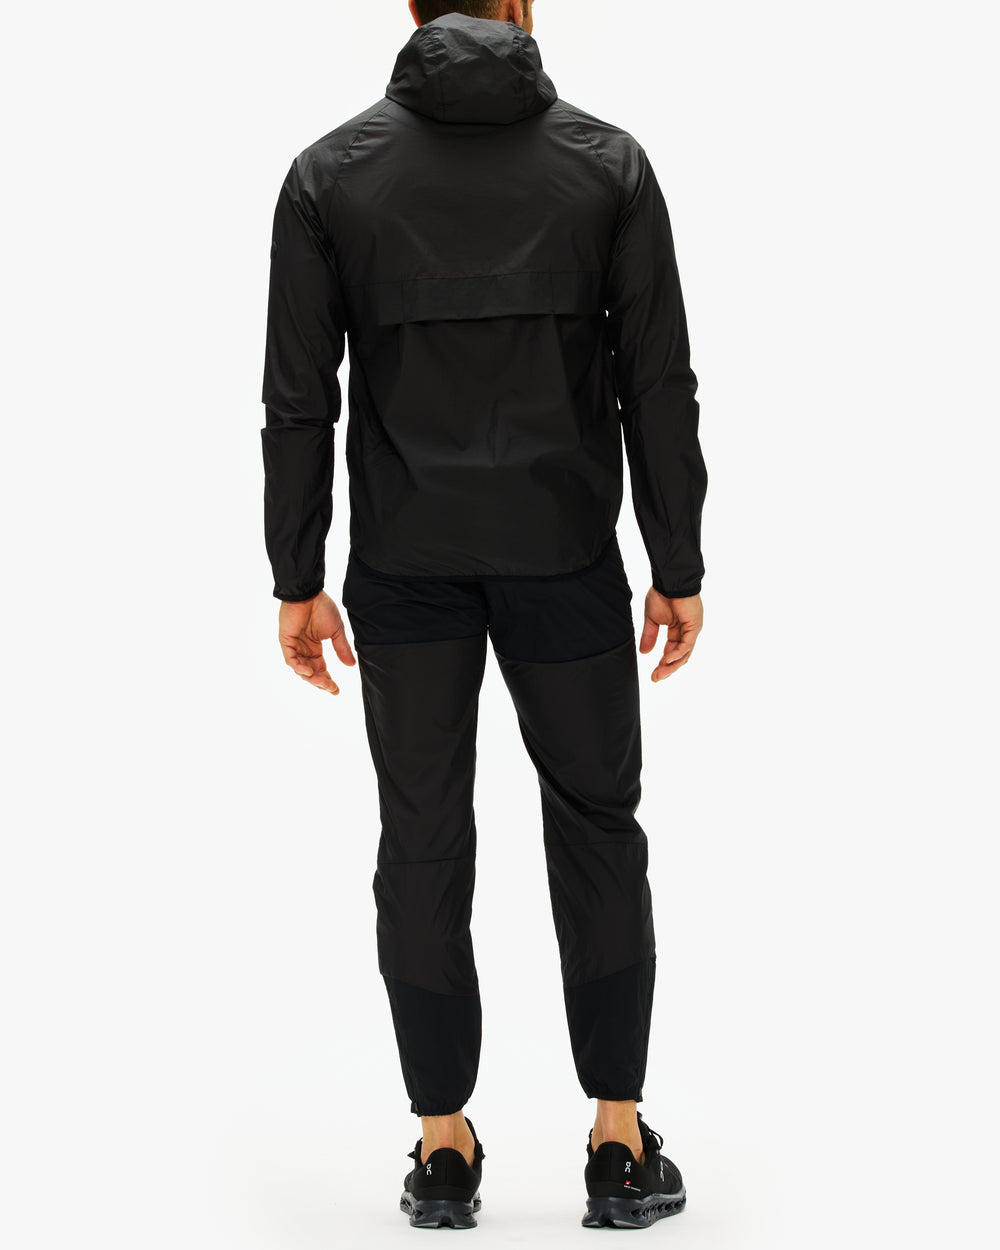 District Vision Ultralight Dwr Paneled Track Pants